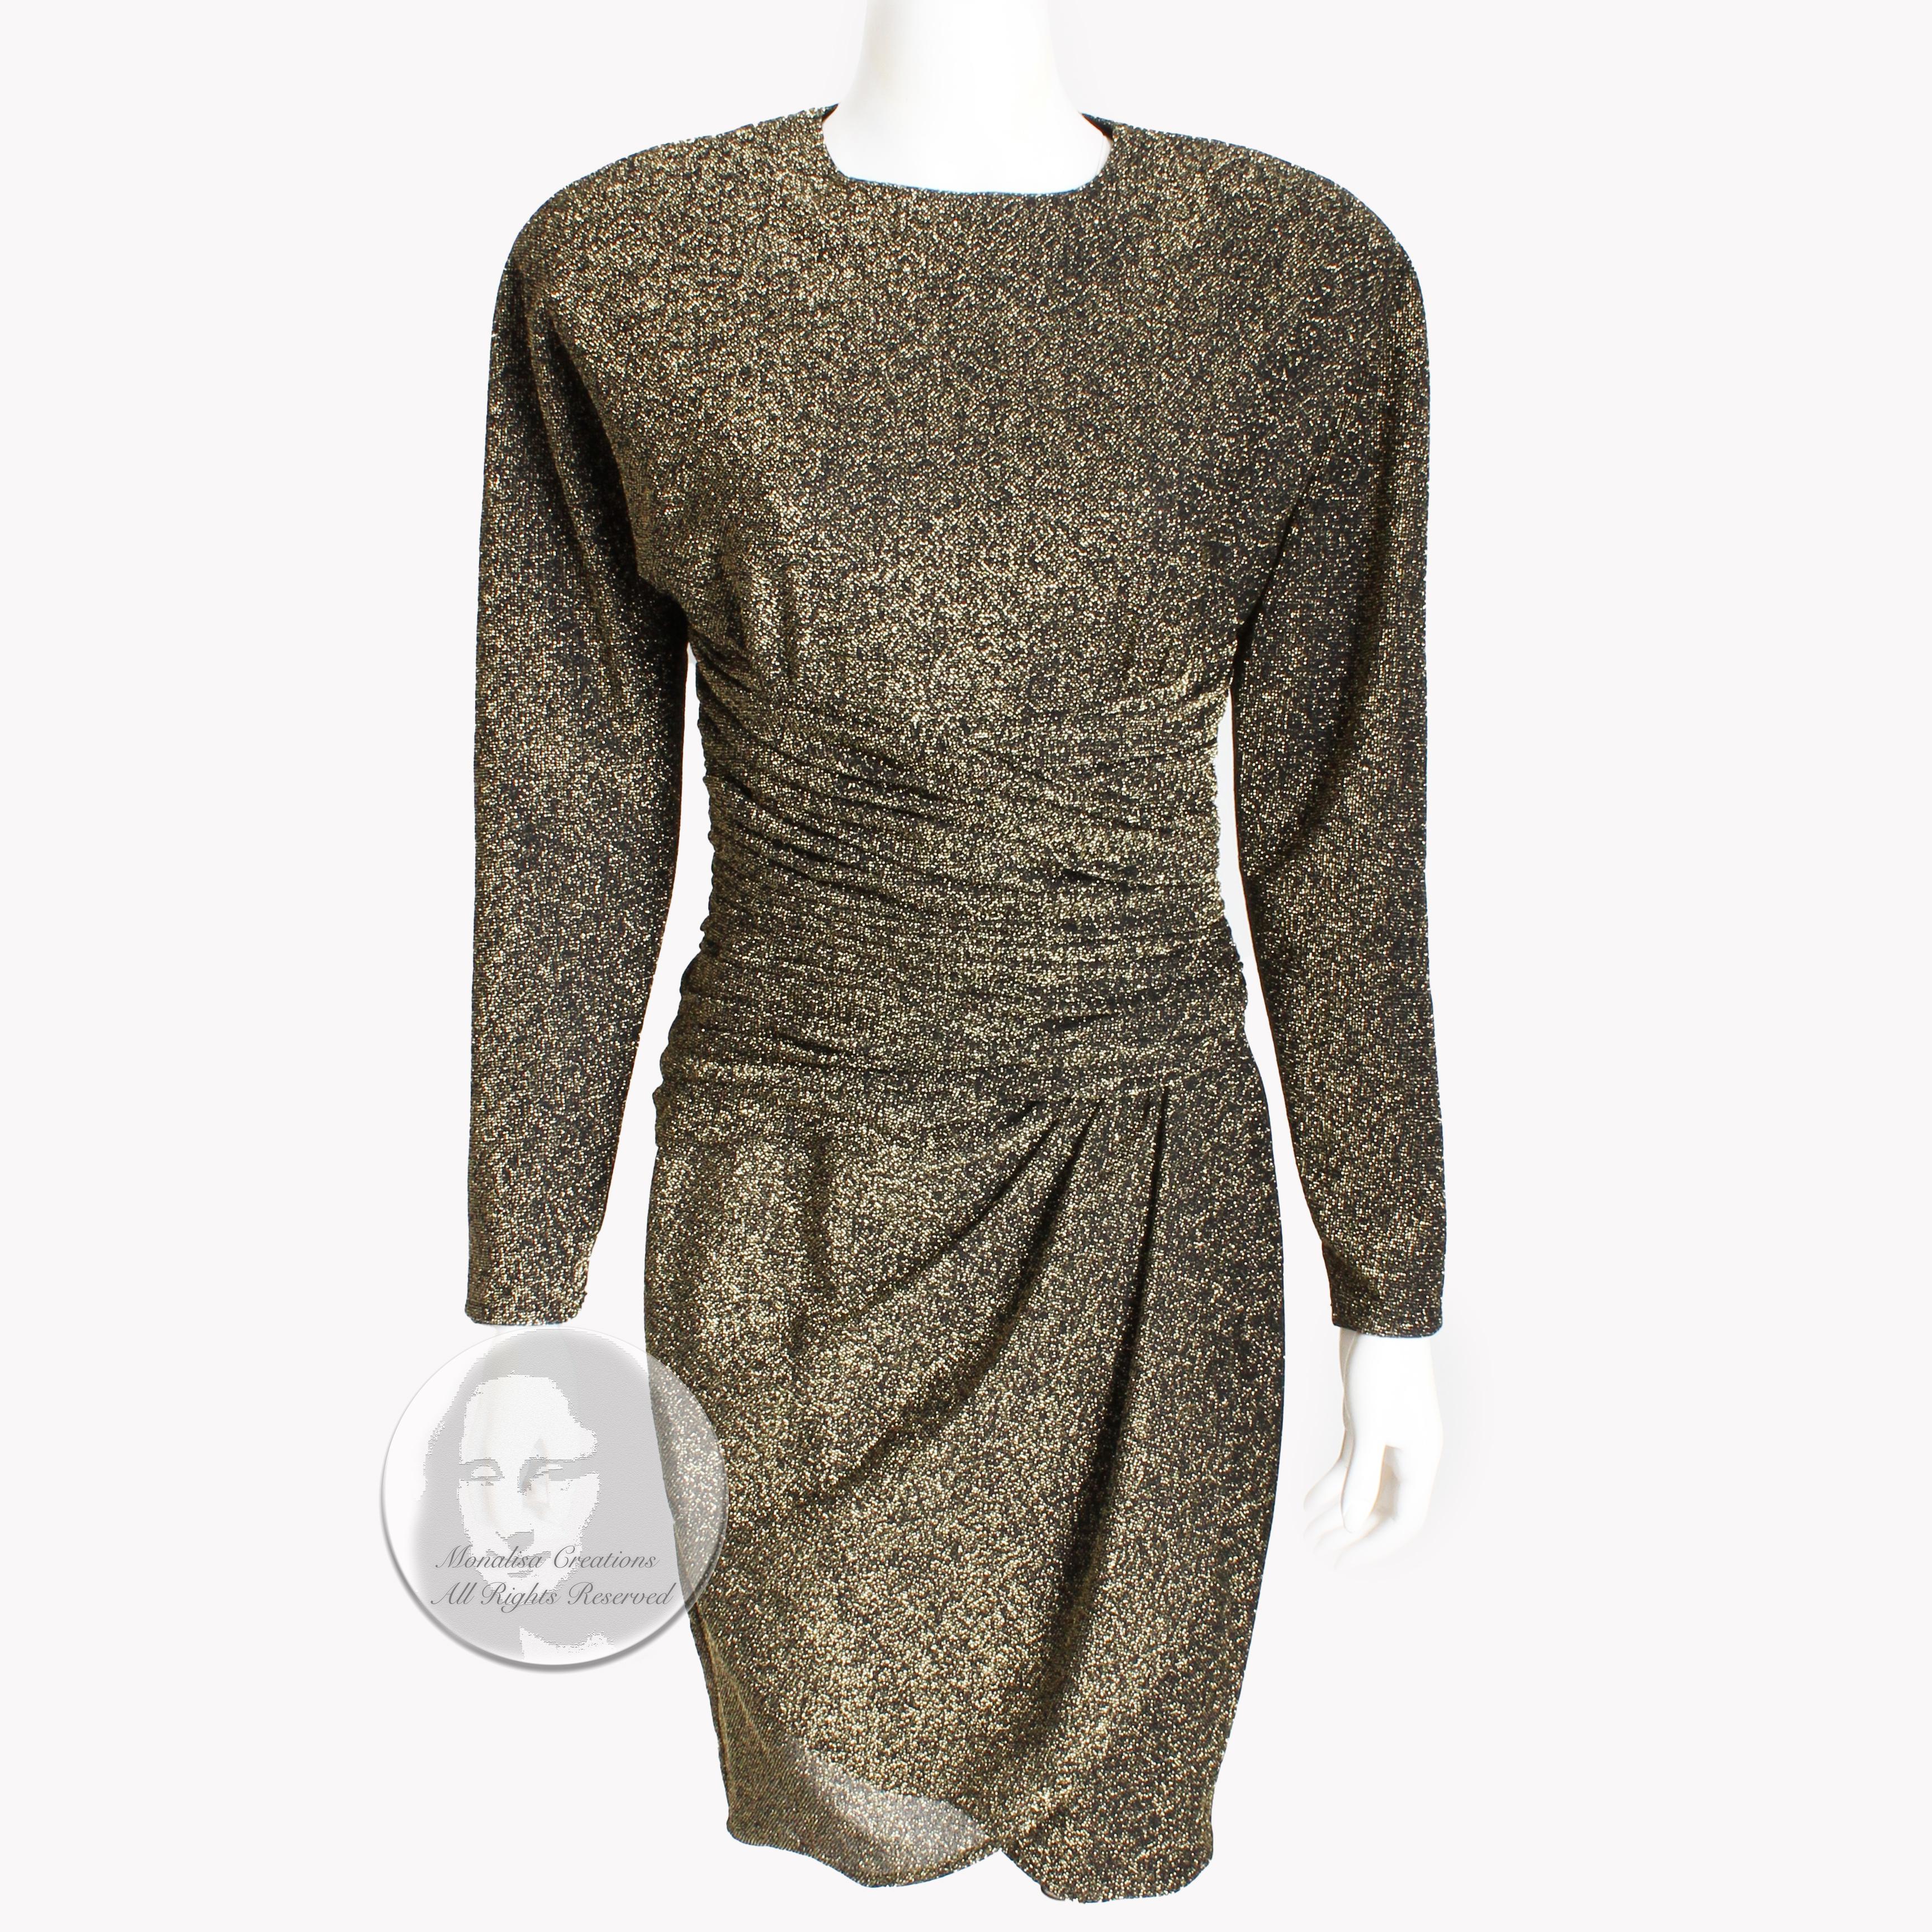 Celebrate in style with this vintage cocktail dress, made by Morton Myles for the Warren's, most likely in the early 1980s.  Made from a shimmery gold metallic fabric, it features a cinched waist with ruching, a tulip style skirt and strong